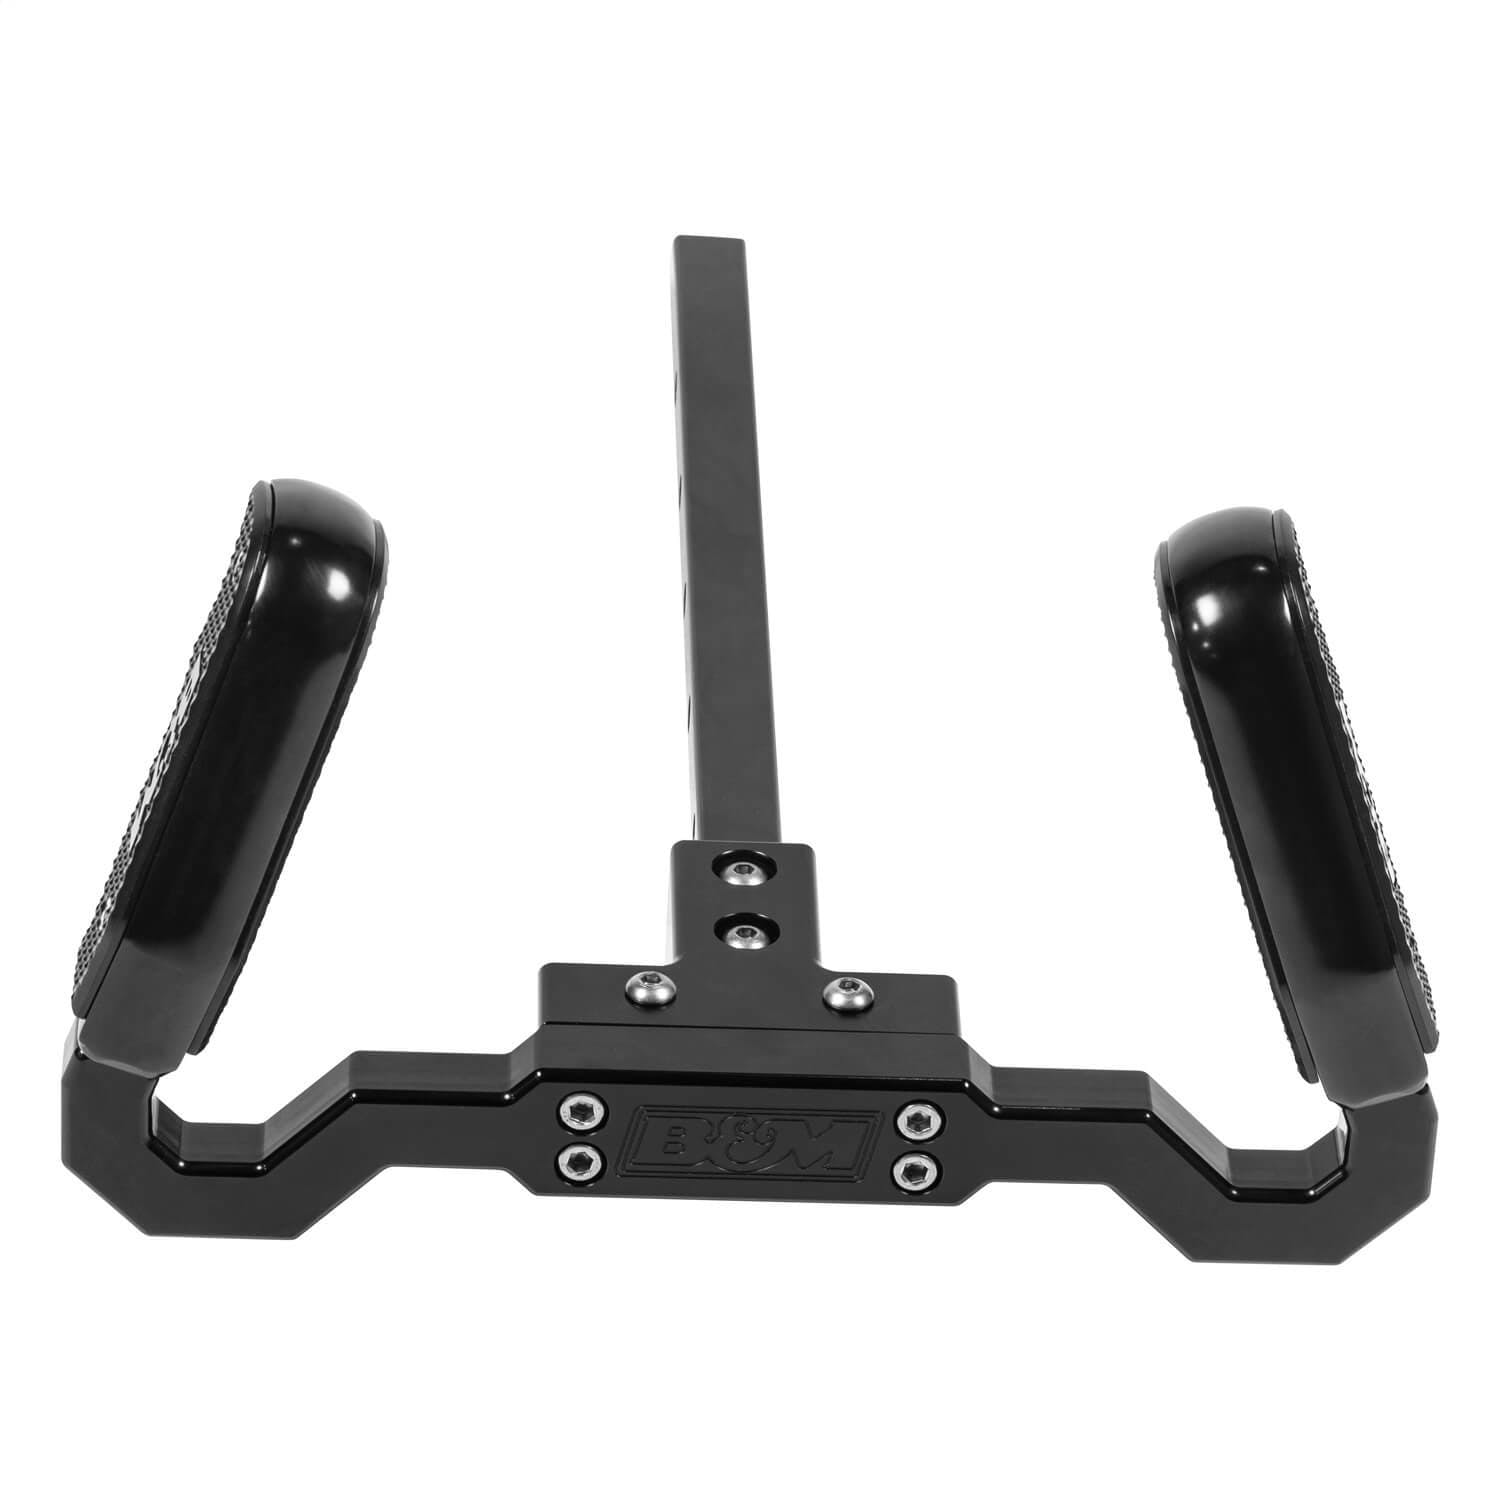 XDR 81154 08-20 RZR, PASS. GRAB HANDLE